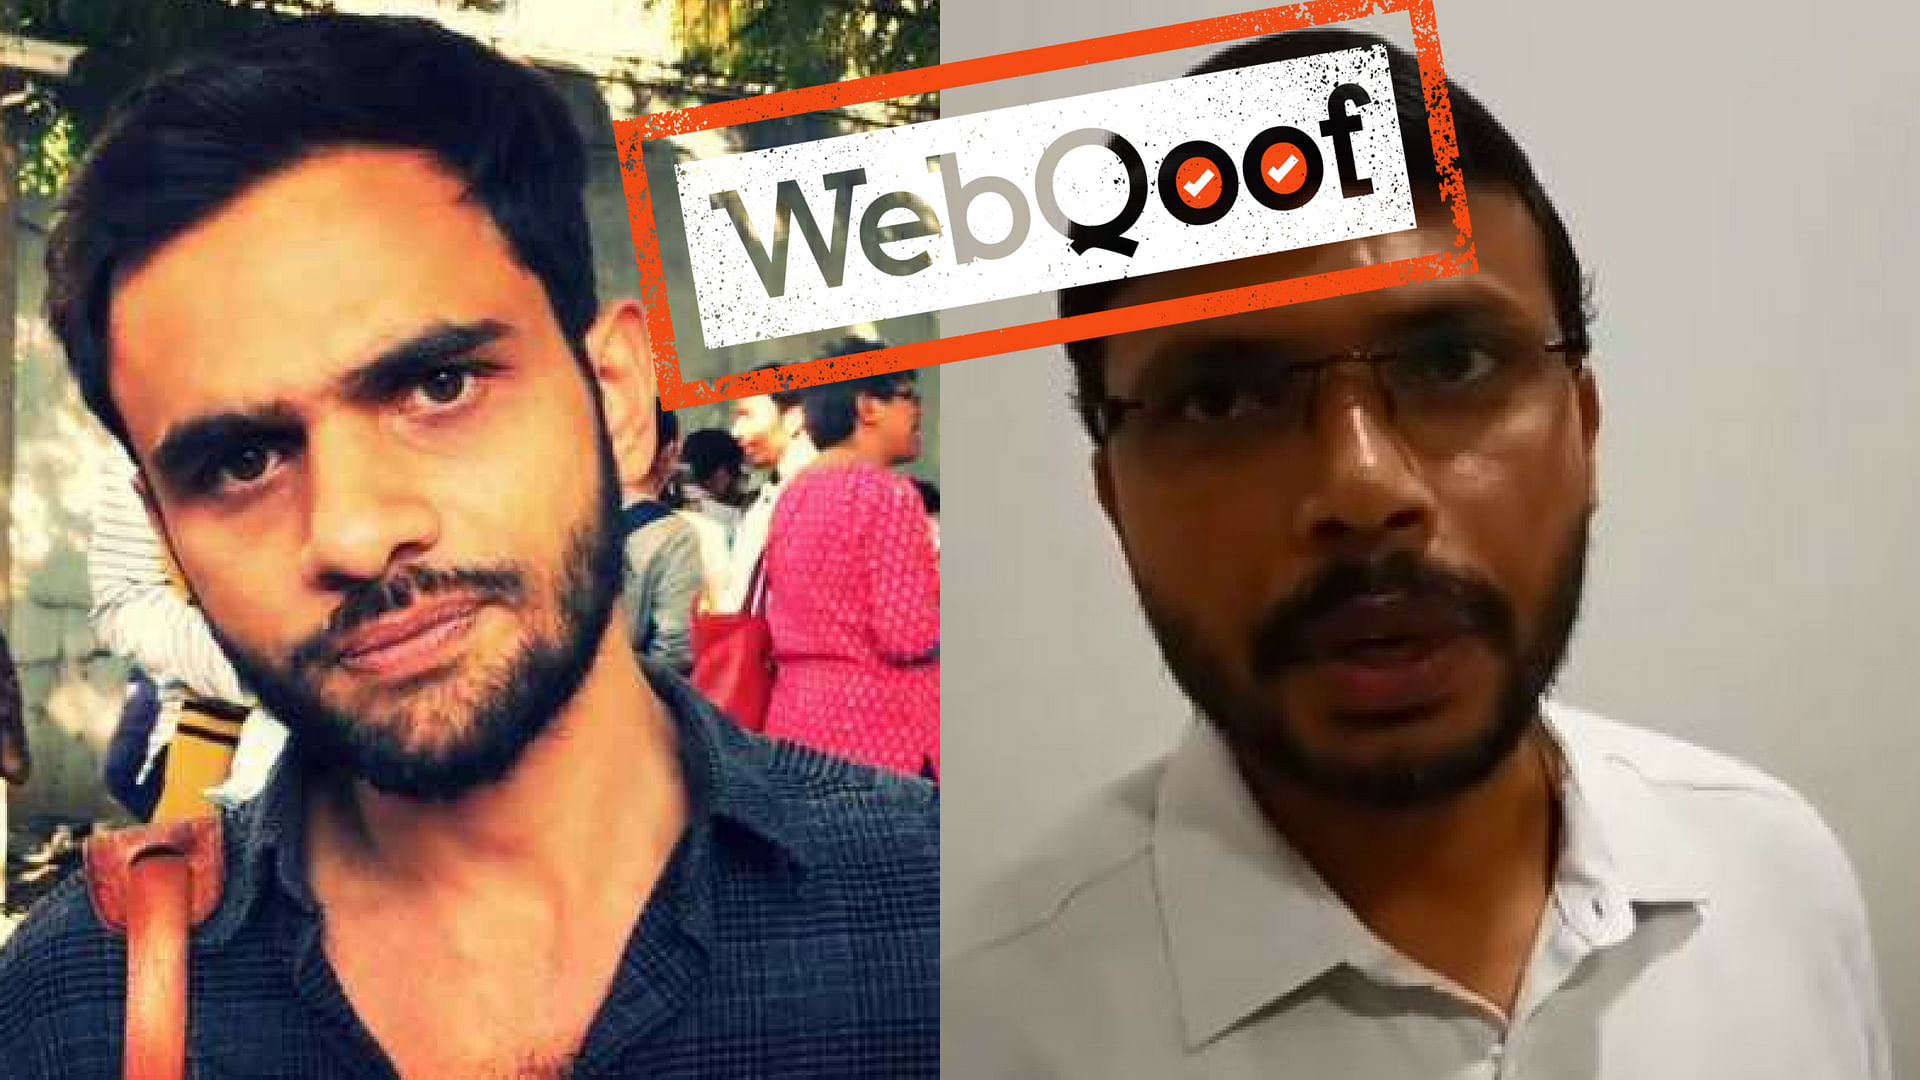 A a journalist with Dainik Bhaskar, <a href="https://twitter.com/santoshji">Santosh Kumar</a> claimed that while there was indeed an incident of firing outside the Constitution Club, Umar Khalid was not present at the spot when the incident took place.